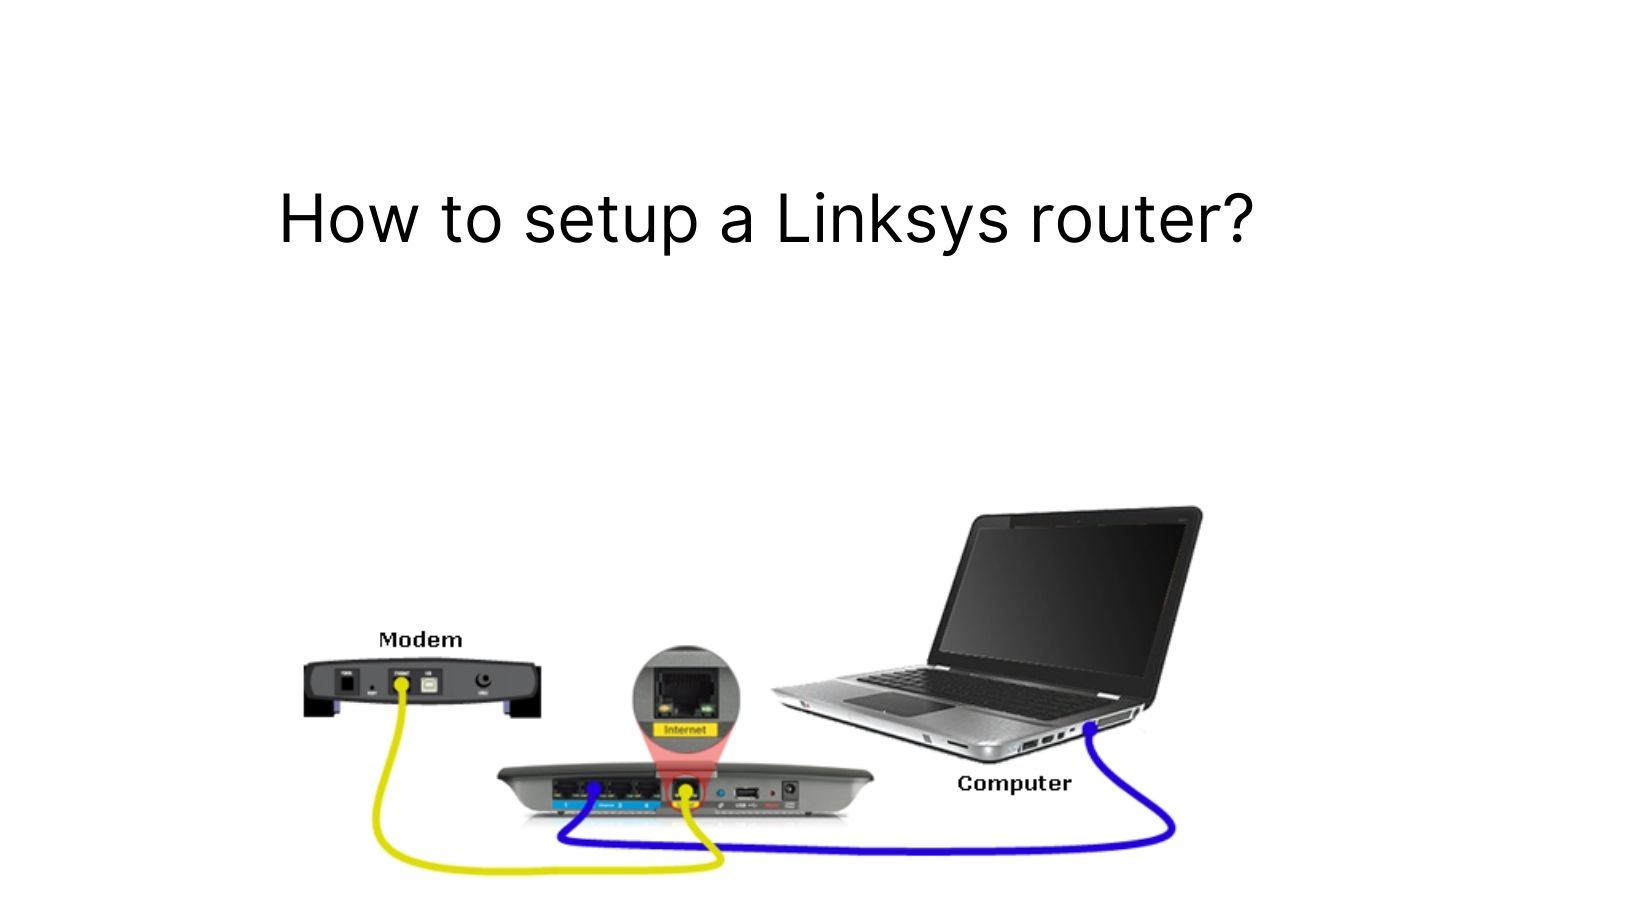 How to setup a Linksys router? - Linksys Extender Setup